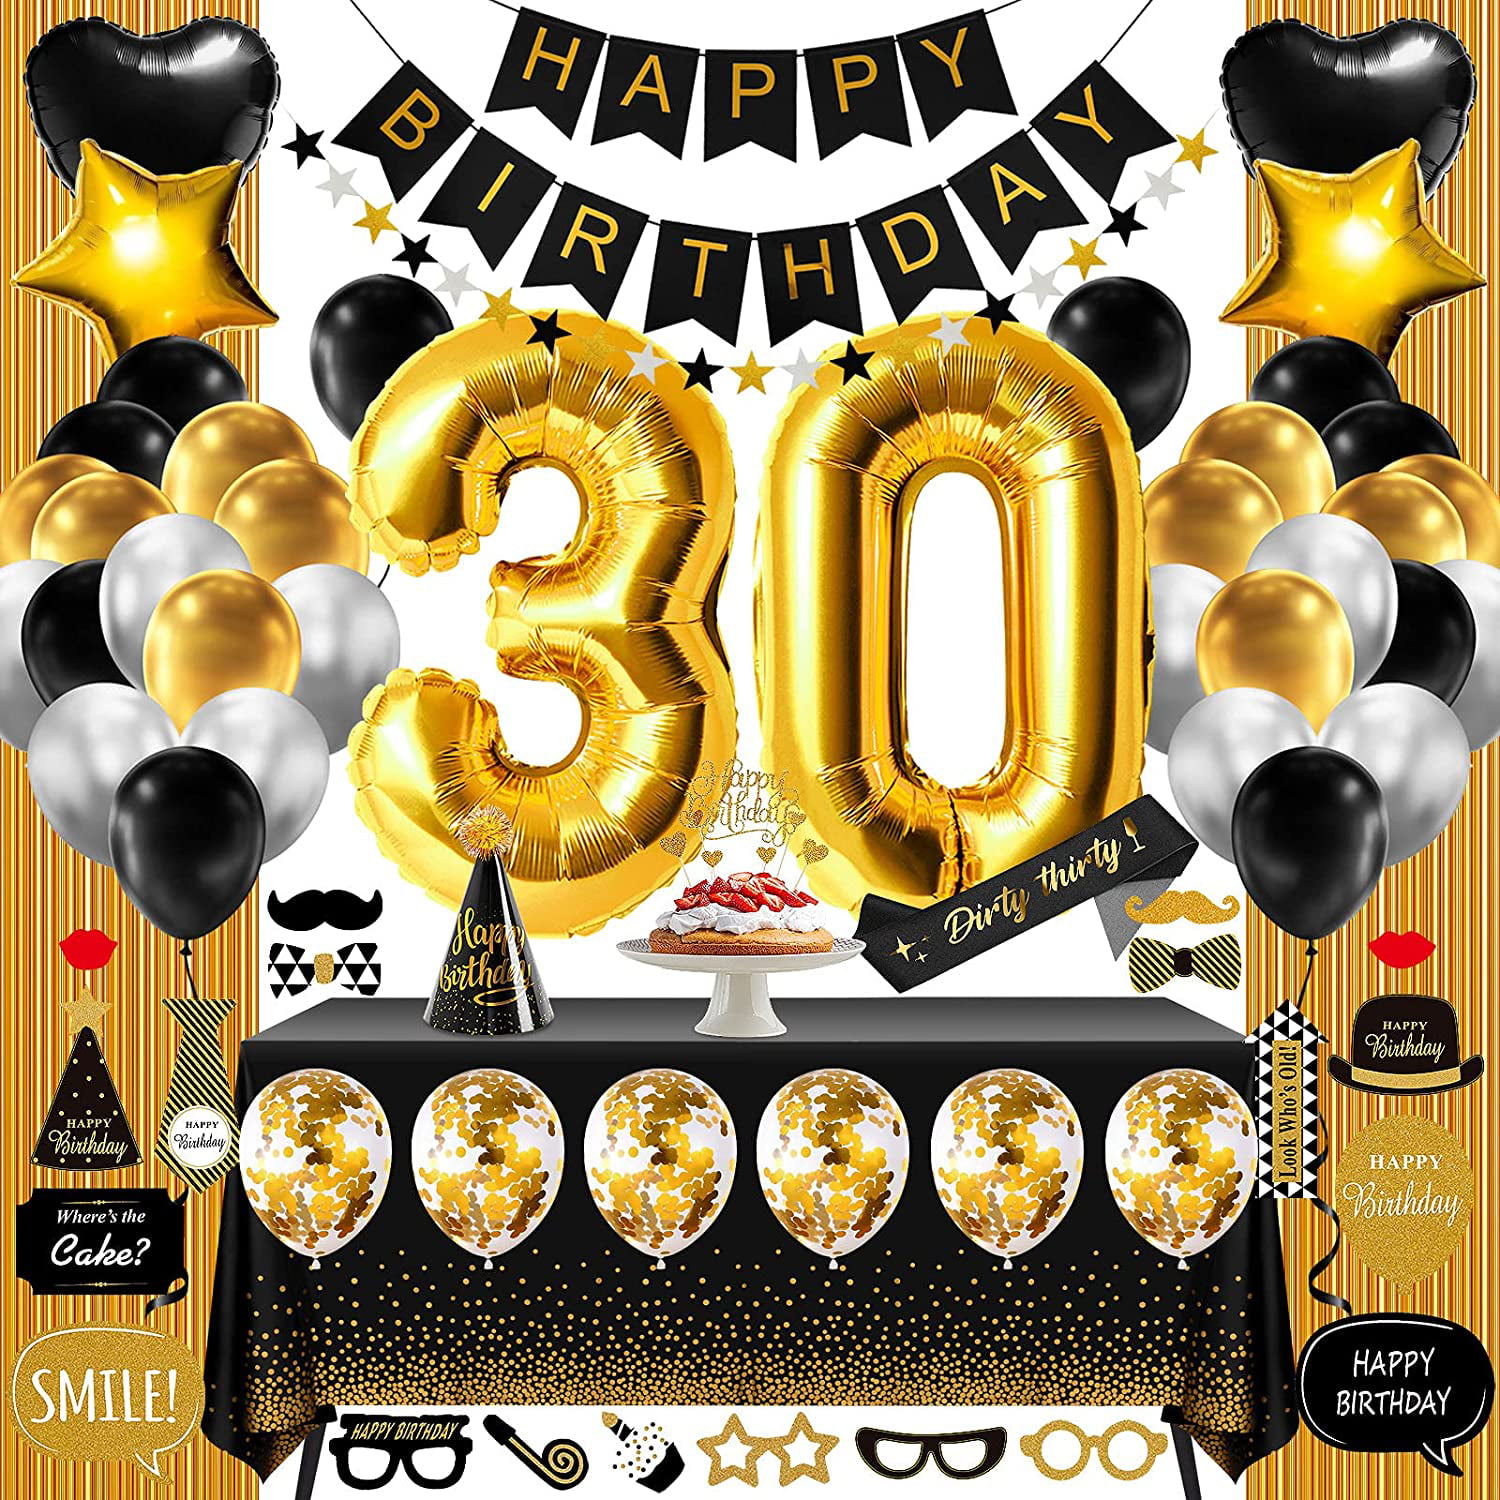 18th Birthday Decorations for Women Or Men Black & Gold, 18 Birthday Party  Supplies Gifts for Her Him Including Happy Birthday Balloons, Fringe ...